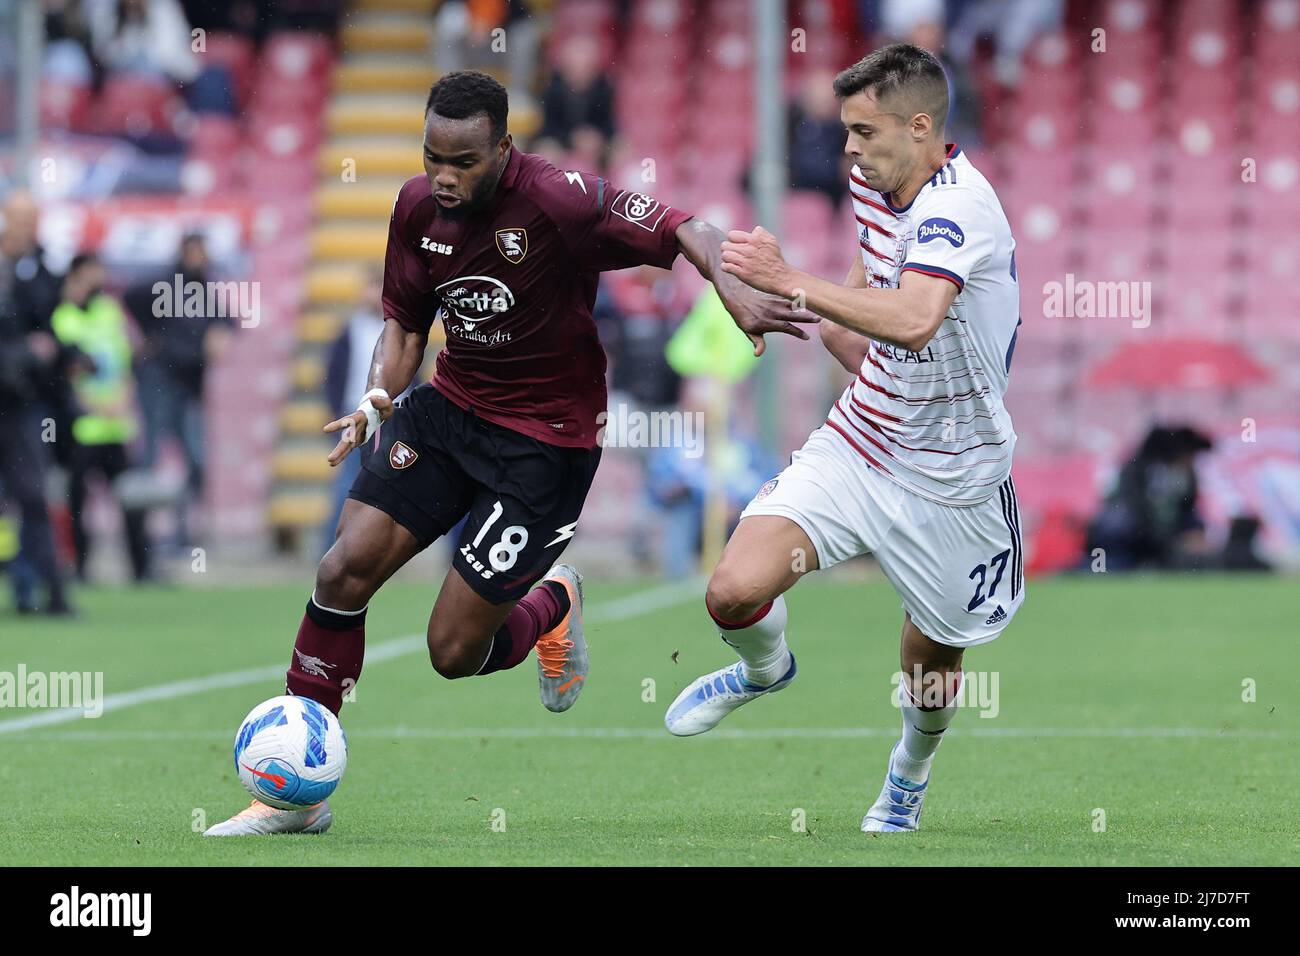 Salerno (Italy), May 8th, 2022. Lassana Coulibaly of US Salernitana  and Alberto Grassi of Cagliari Calcio compete for the ball during the Serie A football match between US Salernitana and Cagliari Calcio at Arechi stadium in Salerno (Italy), May 8th, 2022. Photo Cesare Purini / Insidefoto Stock Photo